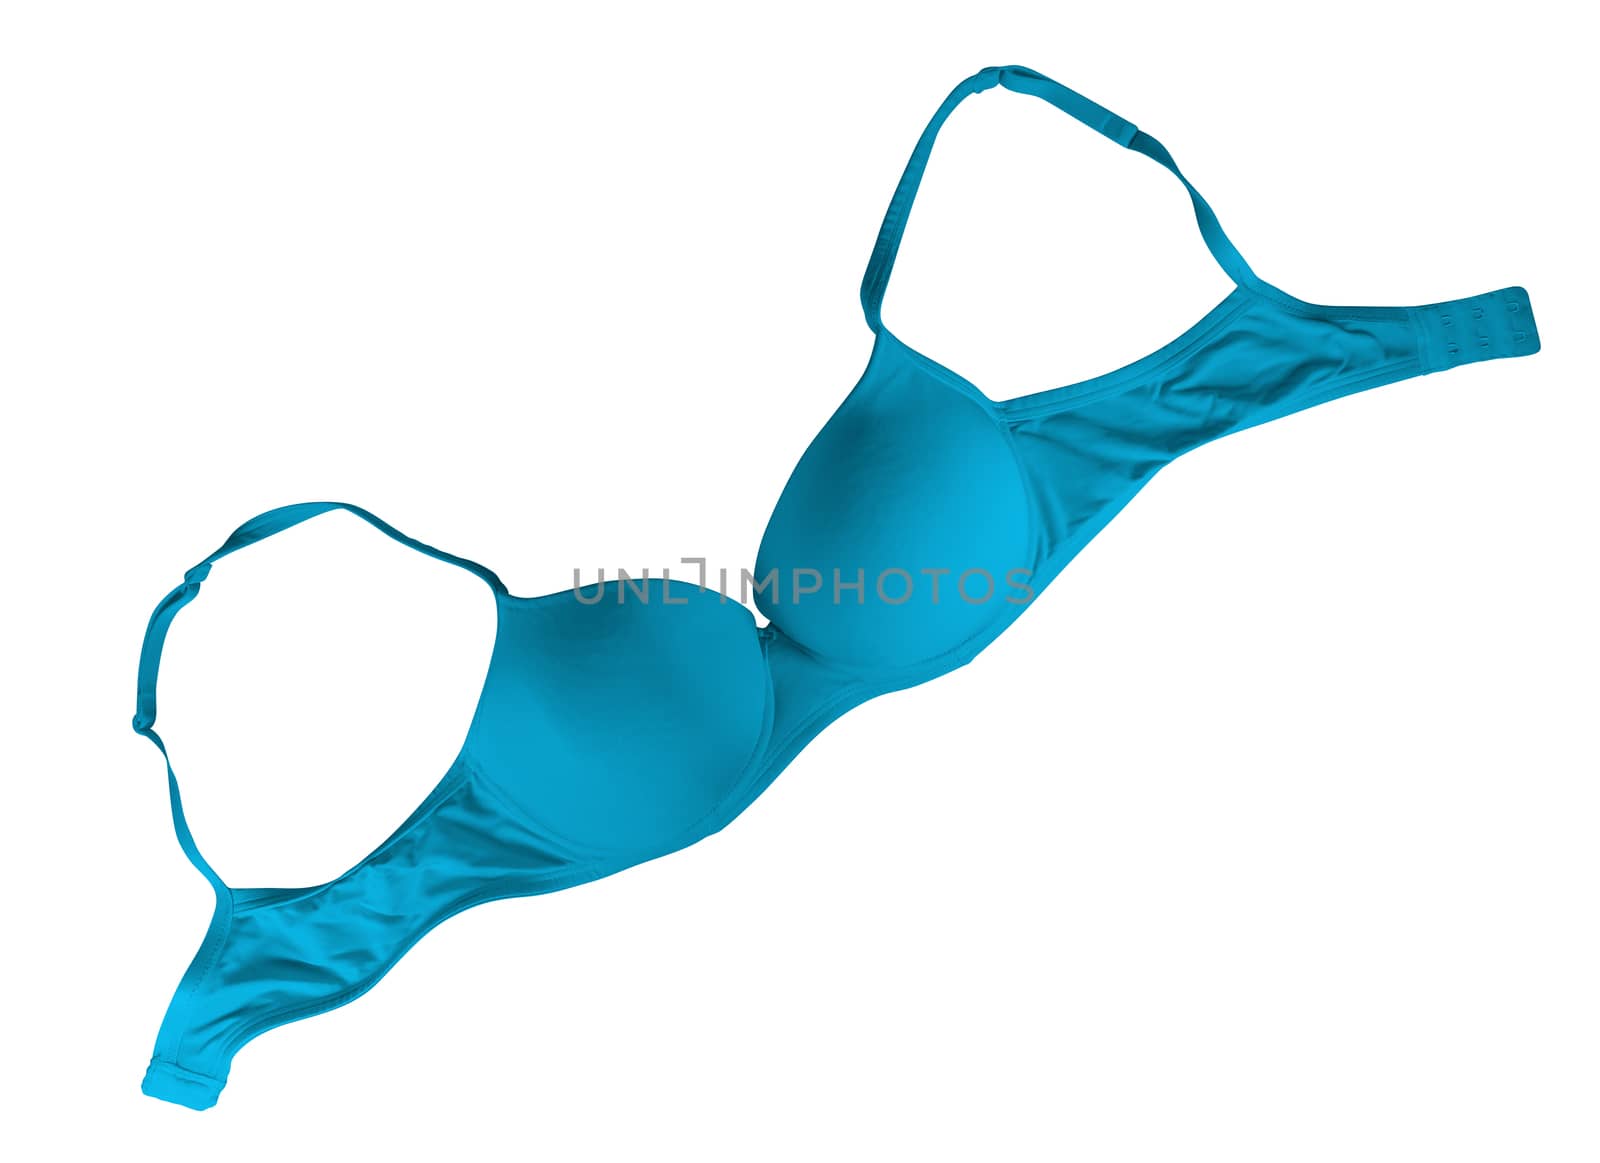 Brassiere isolated - blue by Venakr